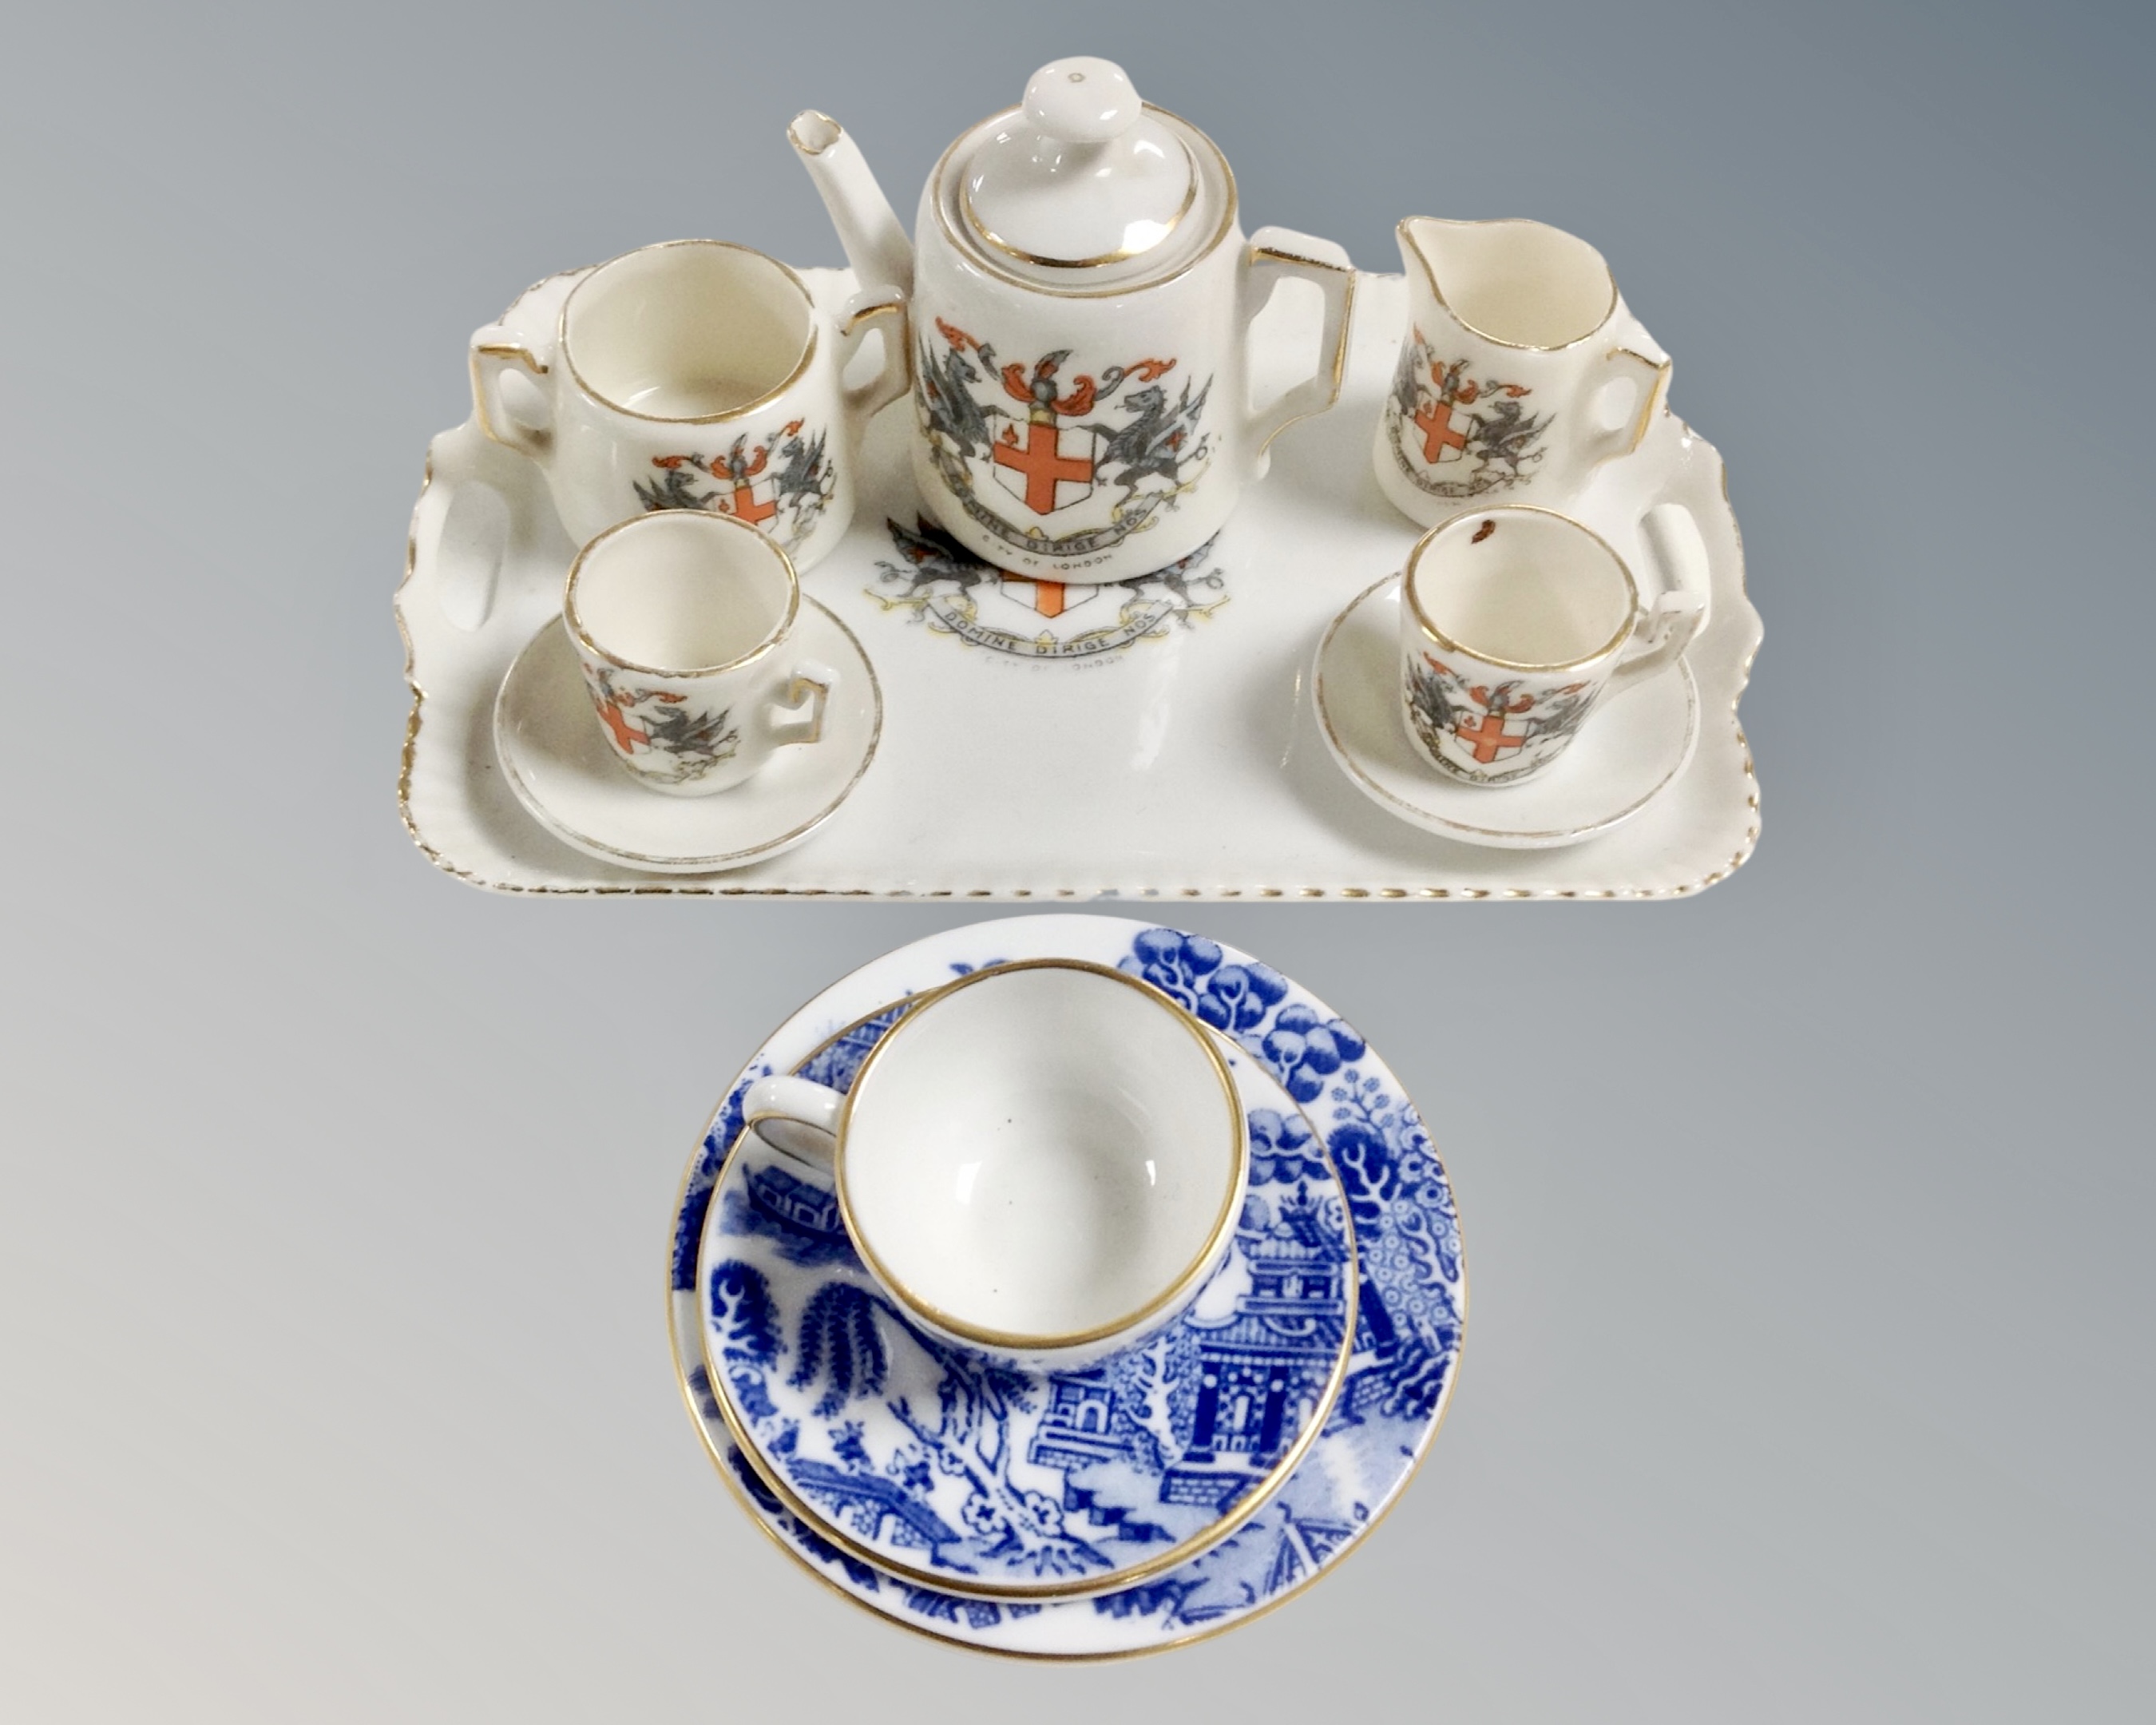 A crested ware miniature tea for two on tray with the arms of the city of London together with